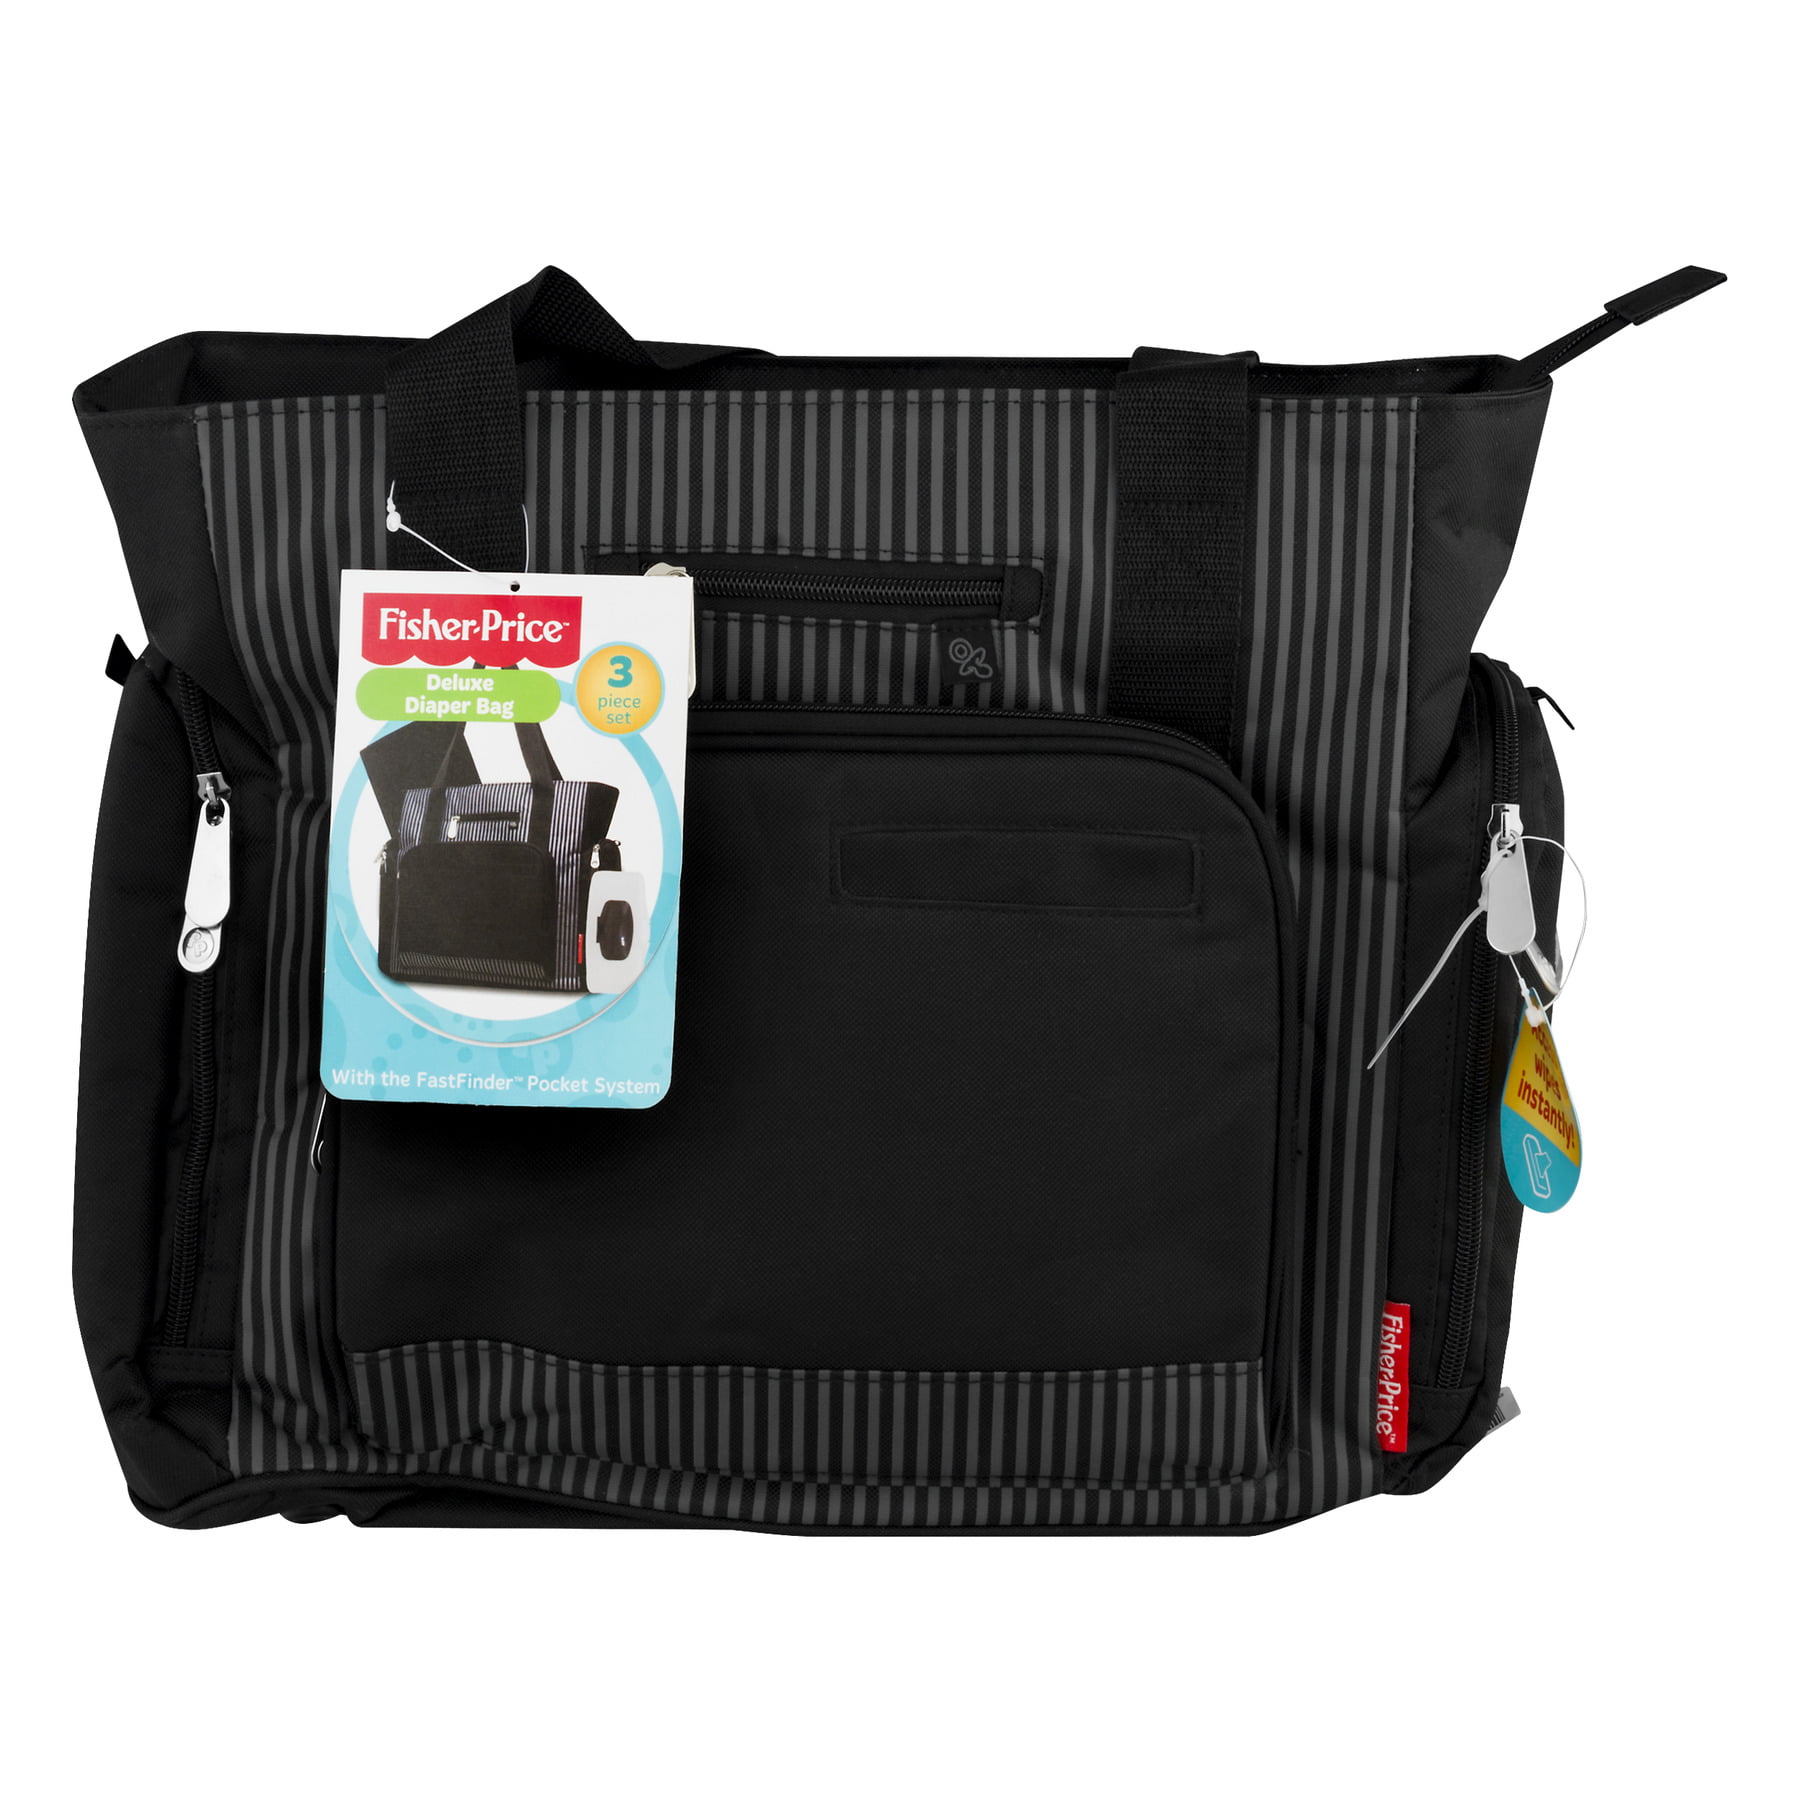 Fisher-Price Tote Diaper Bag with Fastfind Pocket System, Black - www.waterandnature.org - www.waterandnature.org